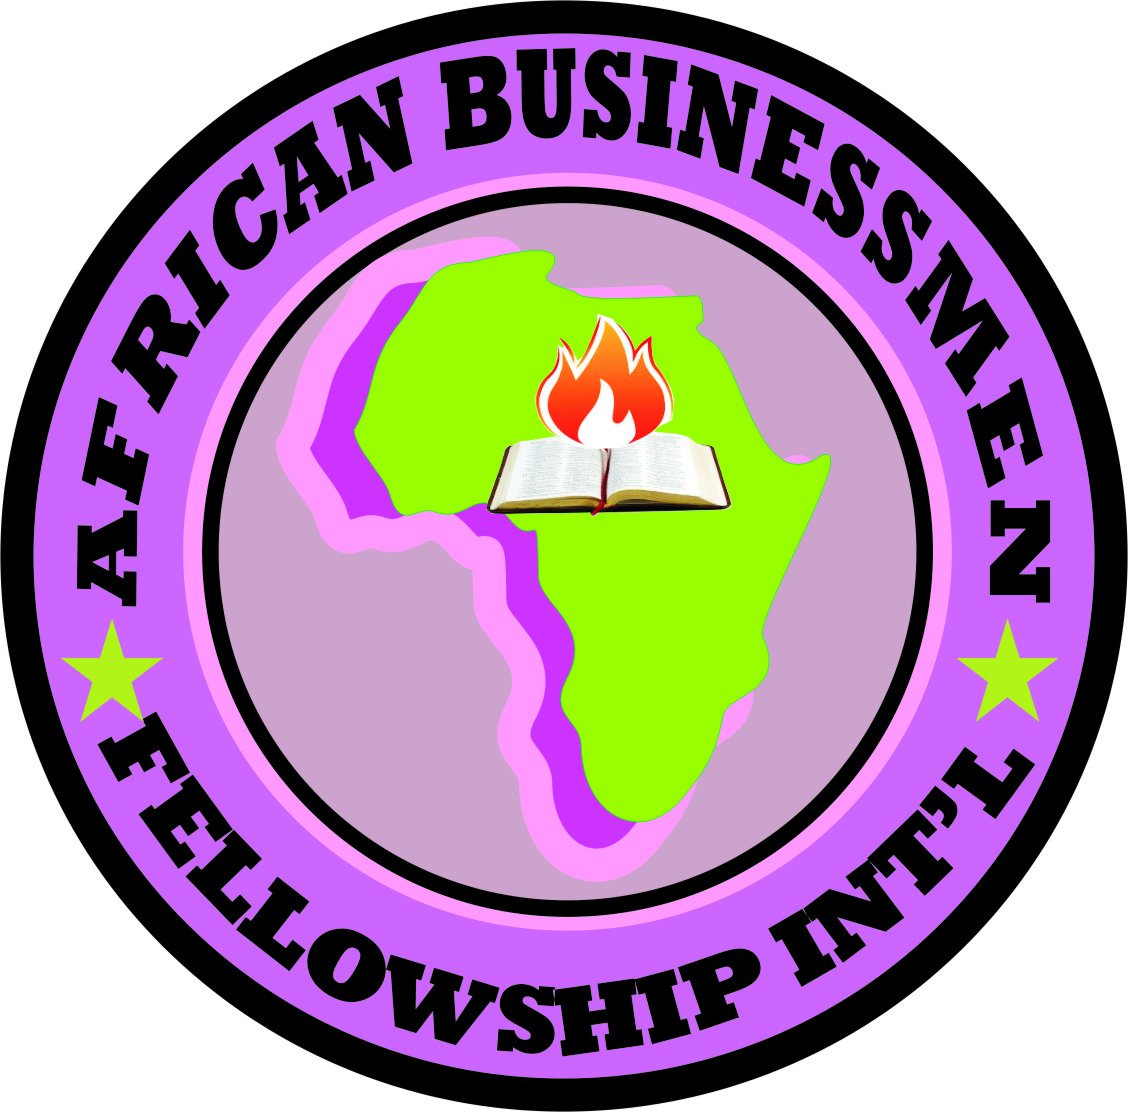 A cooperative society of African businessmen and women based on biblical principles of doing business.